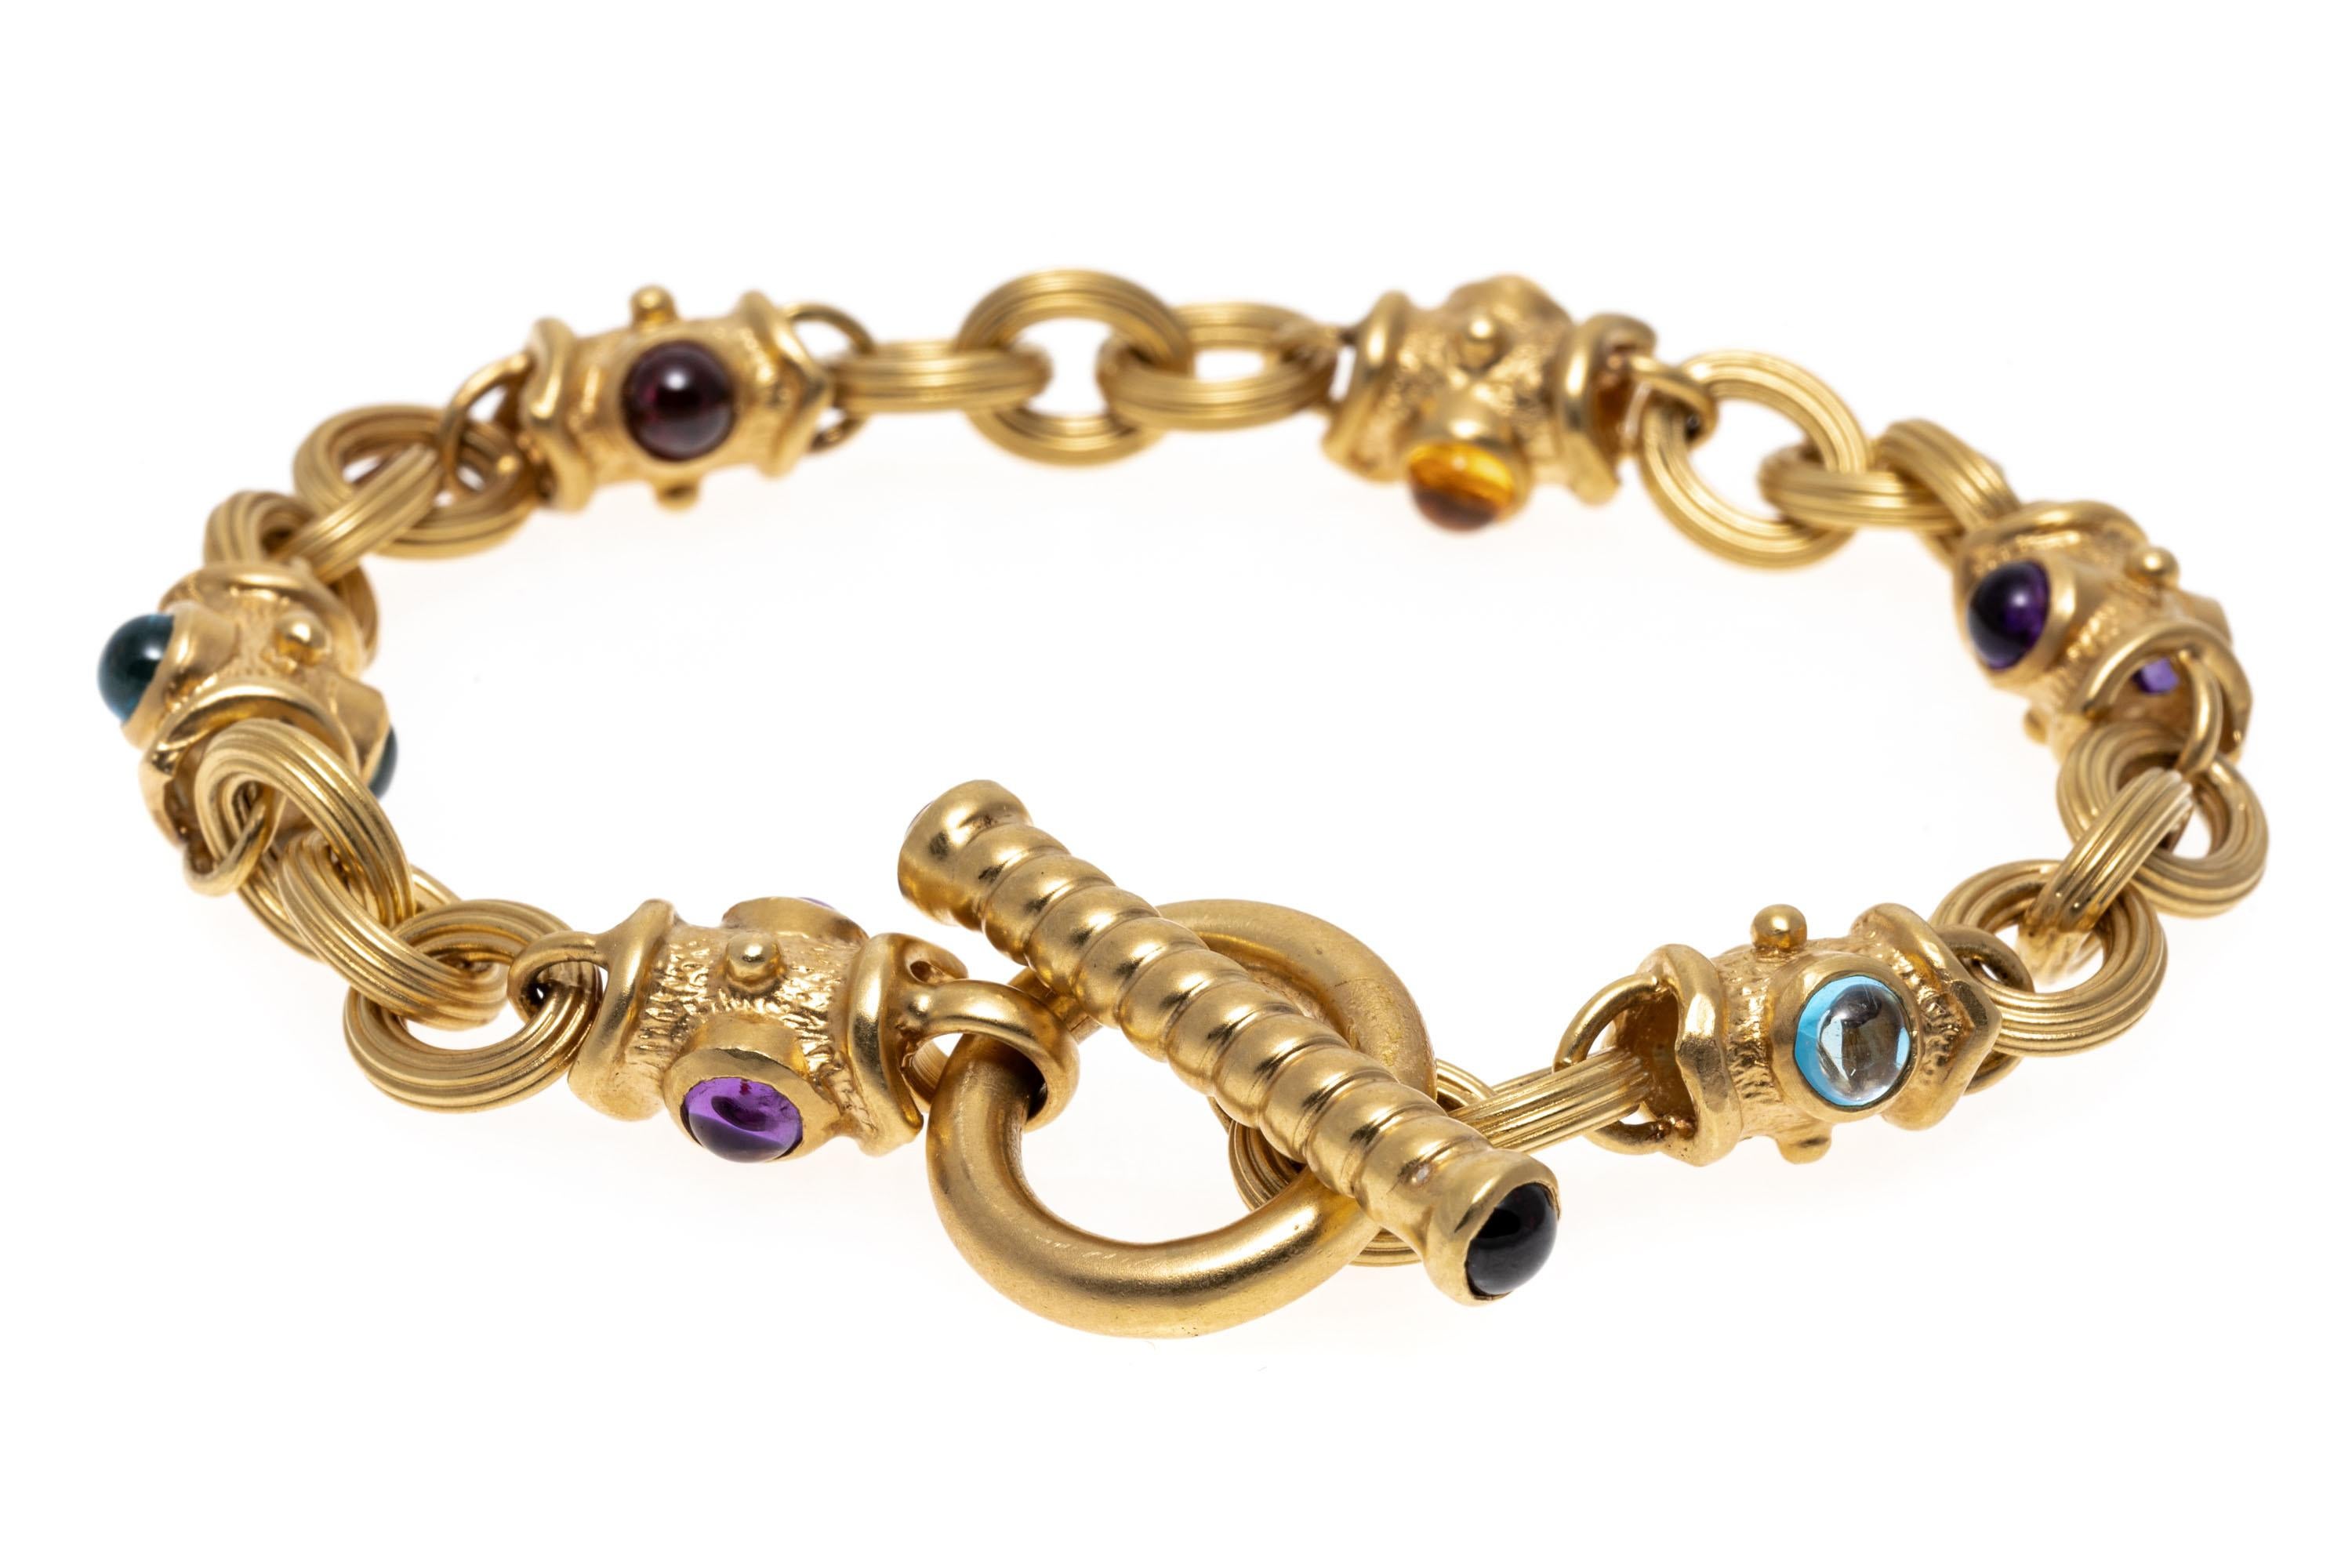 14k yellow gold bracelet. This classic bracelet is a matte finished, ribbed oval link, set with alternating Byzantine style links, set with round cabachon blue topaz, amethyst, citrine and garnet stones. The bracelet has a toggle style clasp.
Marks: